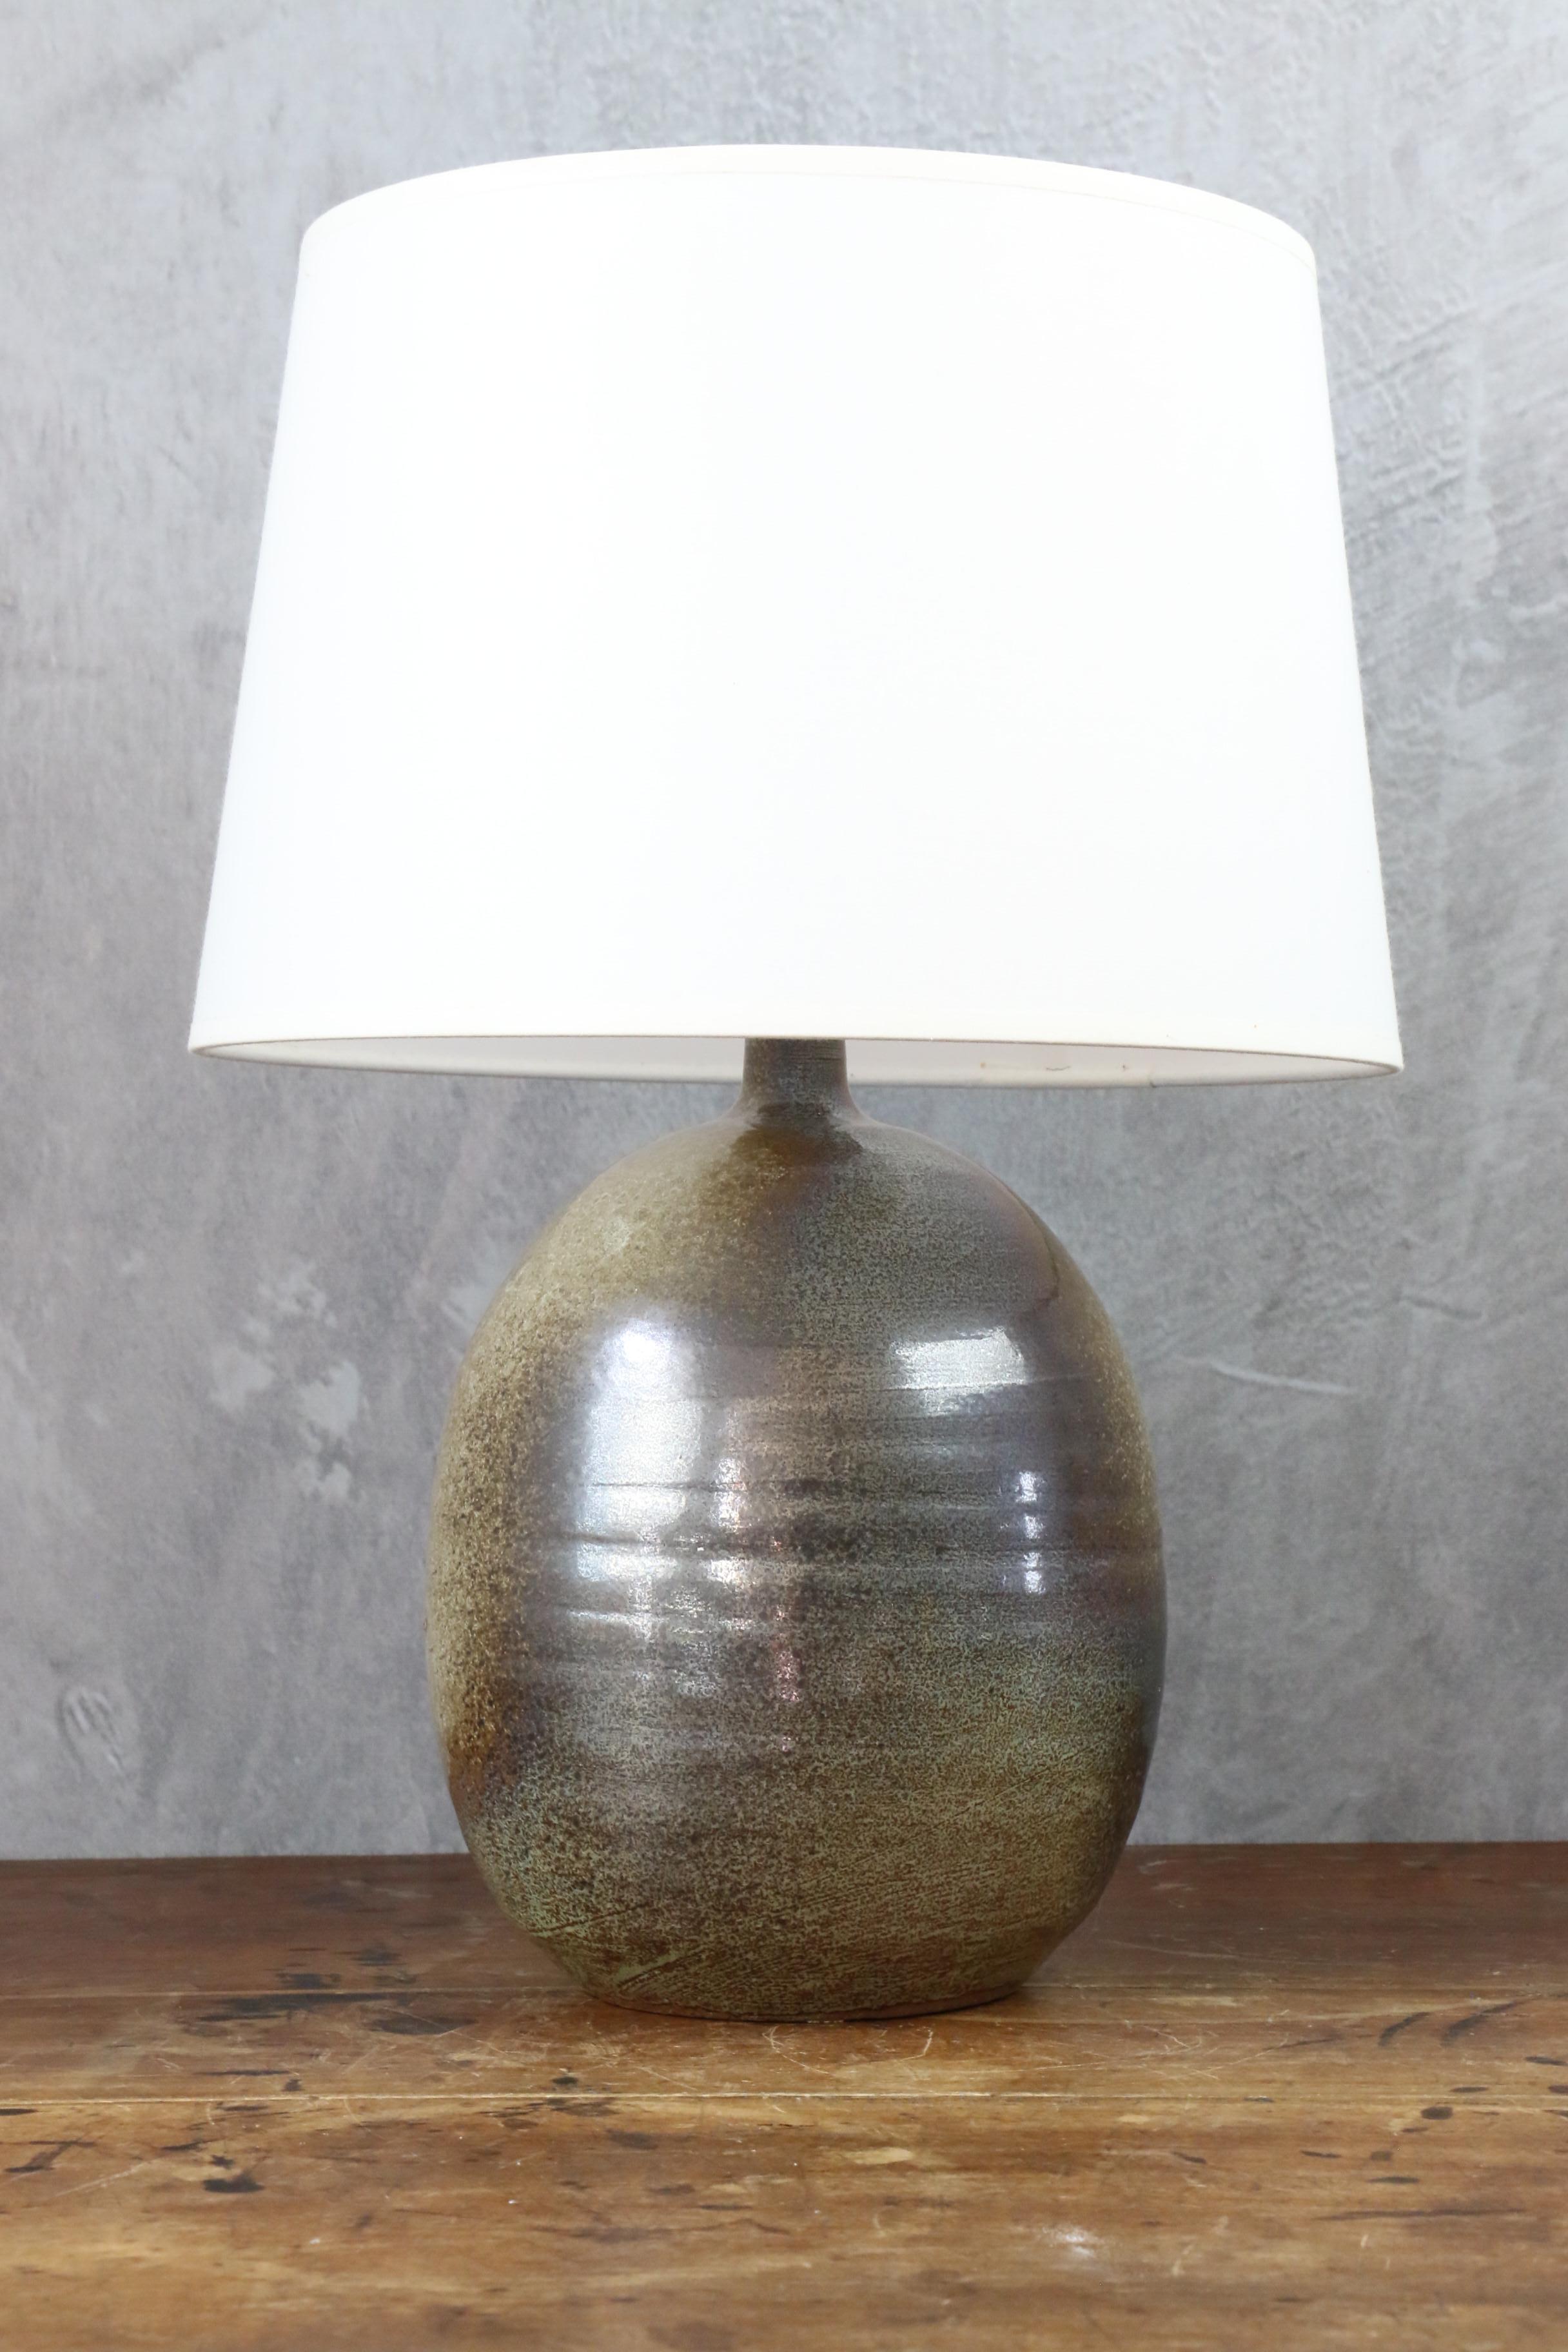 Brown ceramic lamp by Roland Zobel, France, 1960, era Capron, Jouve, Ruelland

Lovely ceramic lamp by the french ceramist Roland Zobel.
The two tones enamel is very beautiful, shiny and soft to the touch. One side of the lamp is light beige, the